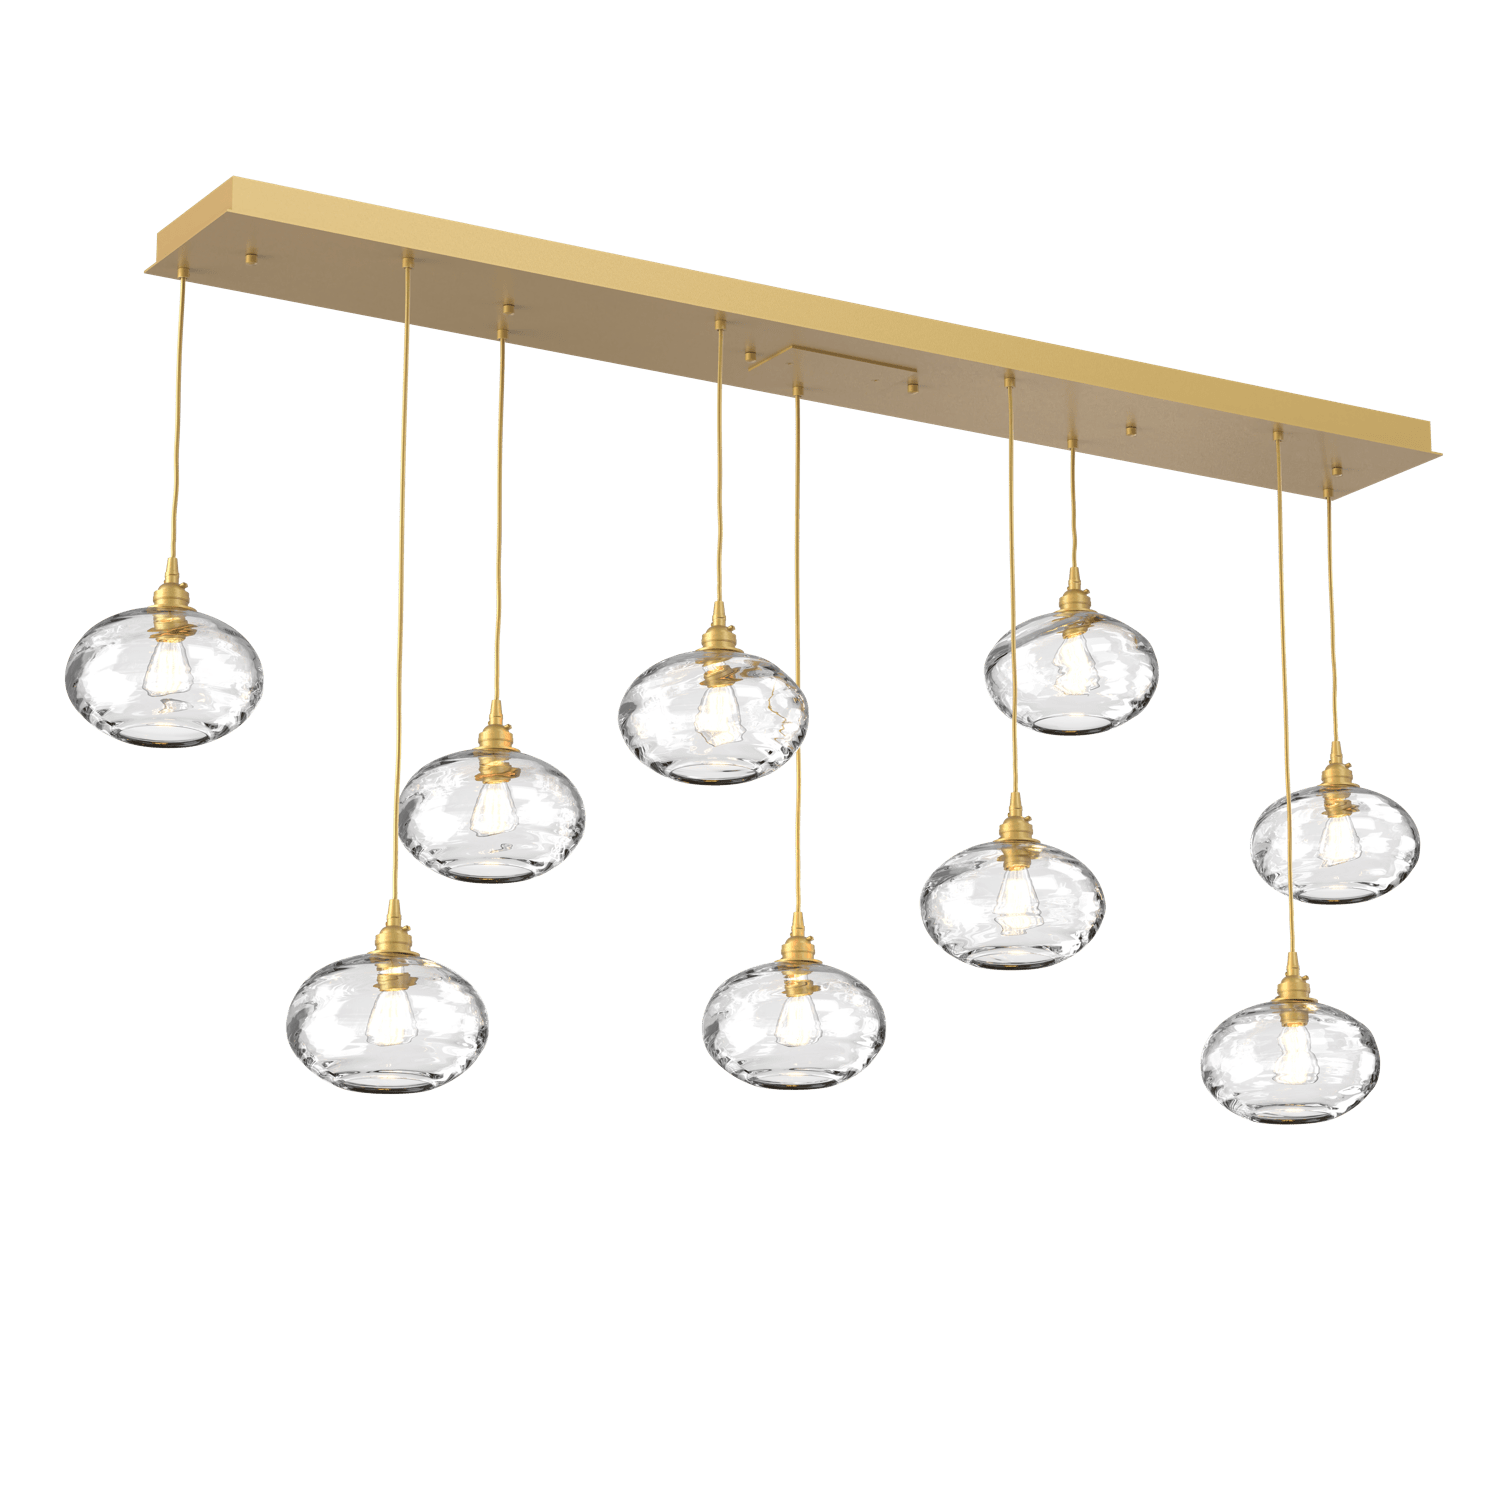 PLB0036-09-GB-OC-Hammerton-Studio-Optic-Blown-Glass-Coppa-9-light-linear-pendant-chandelier-with-gilded-brass-finish-and-optic-clear-blown-glass-shades-and-incandescent-lamping